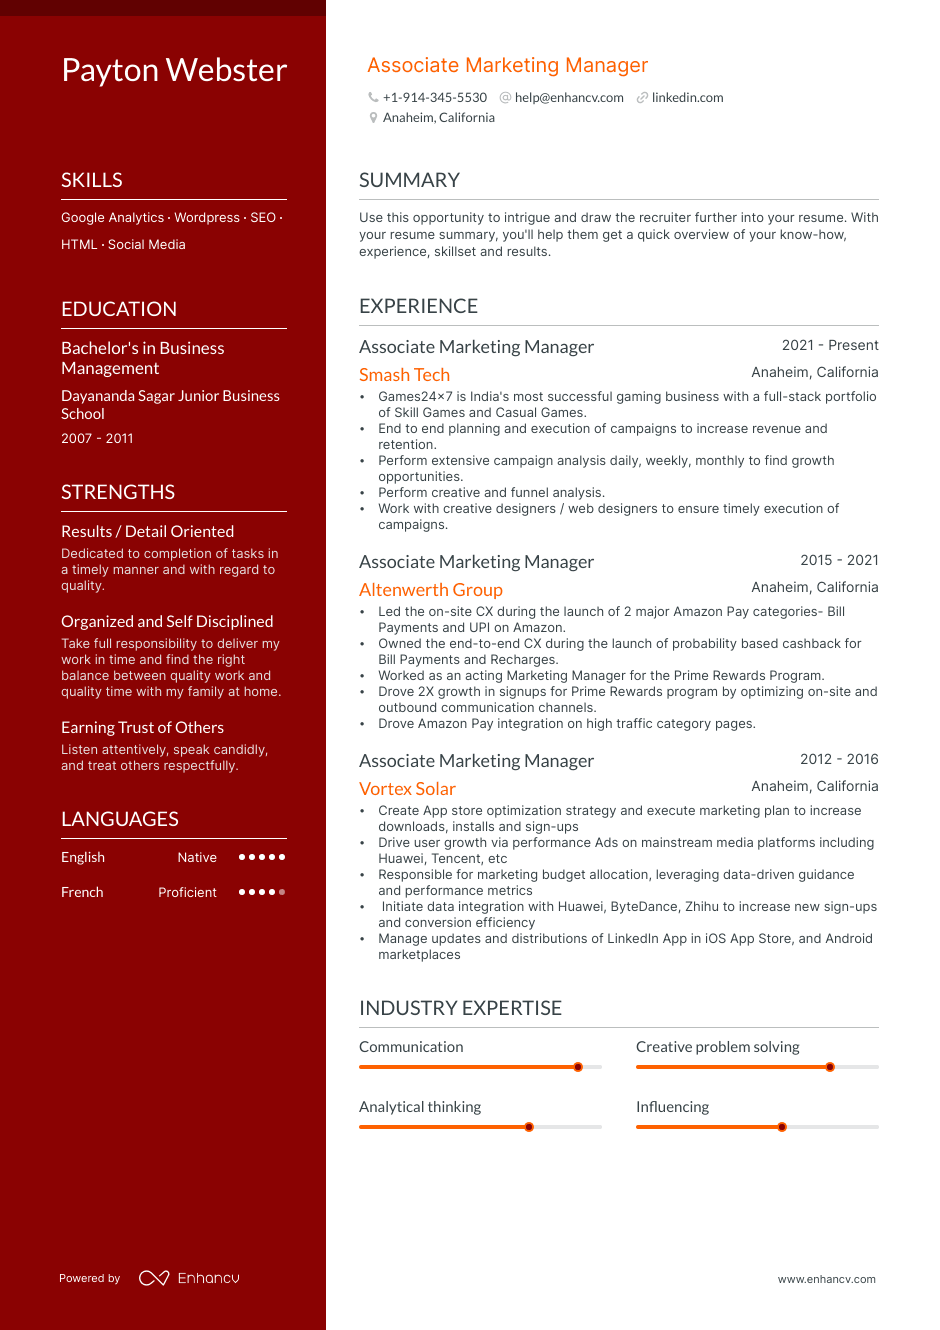 Associate Marketing Manager resume example